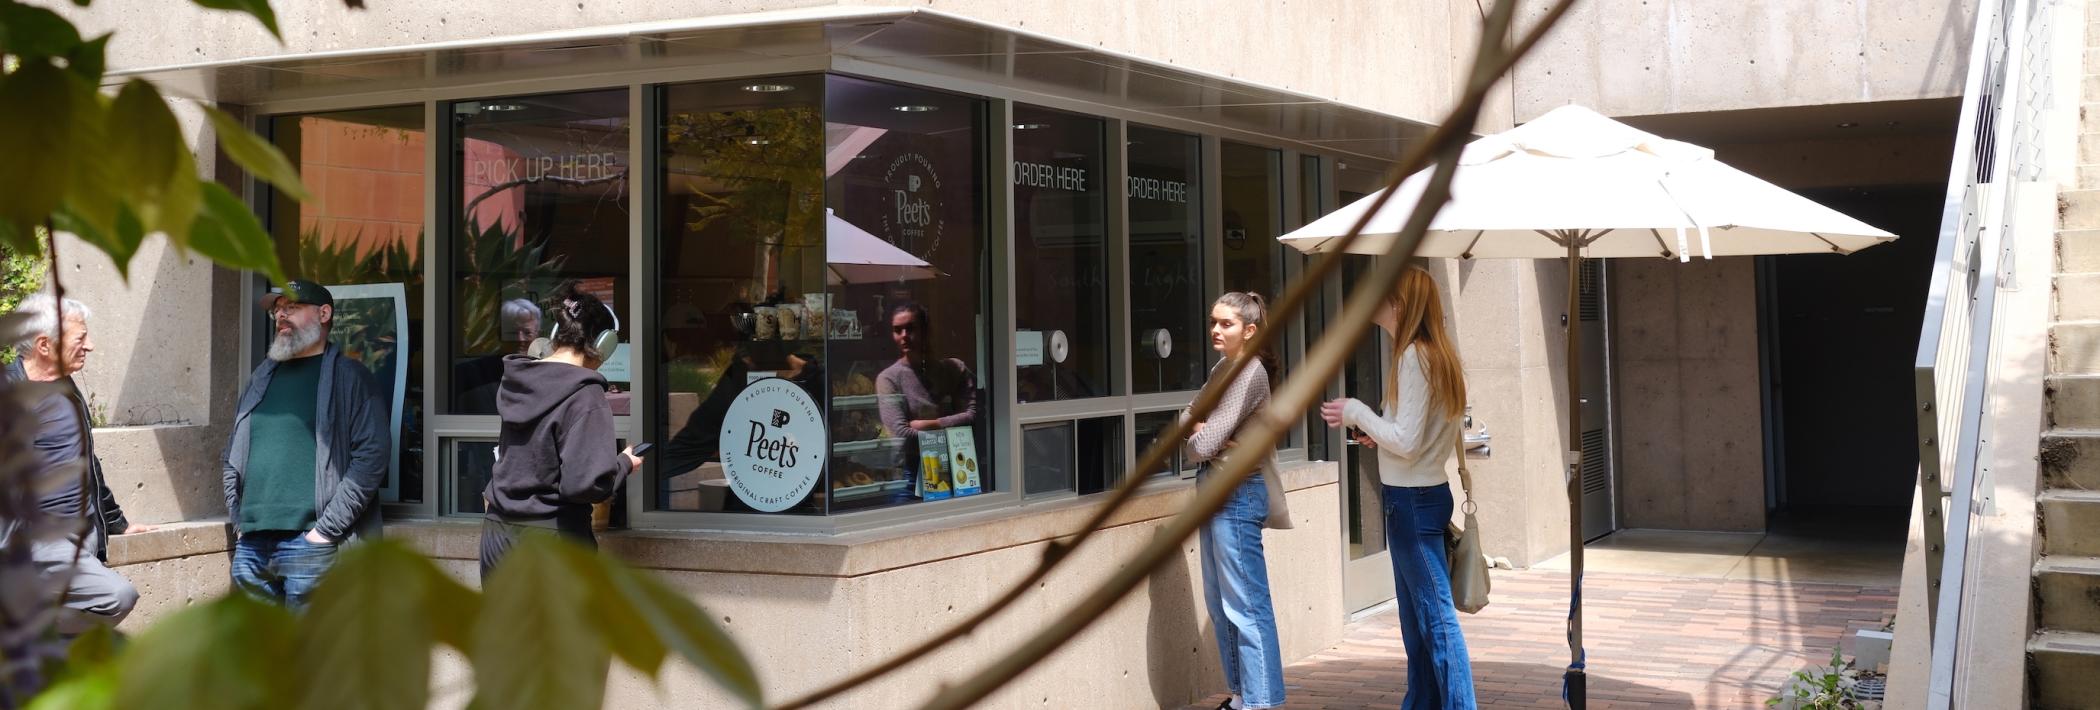 People stand outside a coffee shop with a sign saying Peet's in the window.